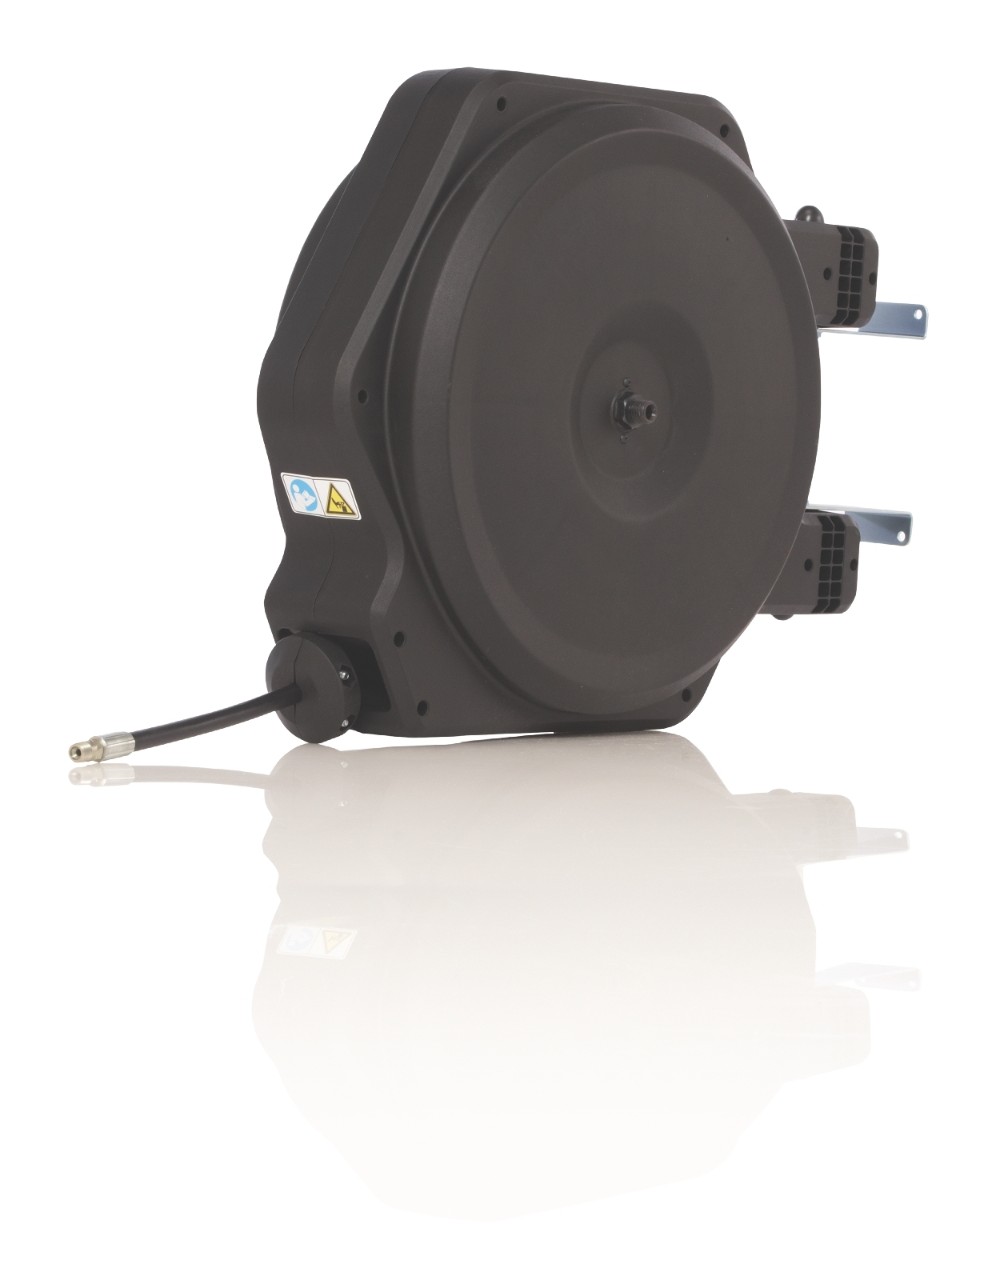 LD™ Series Enclosed Hose Reel with 3/8 in x 35 ft (10 mm X 11 m) Hose for  Petroleum/Synthetic-Based Oil Applications